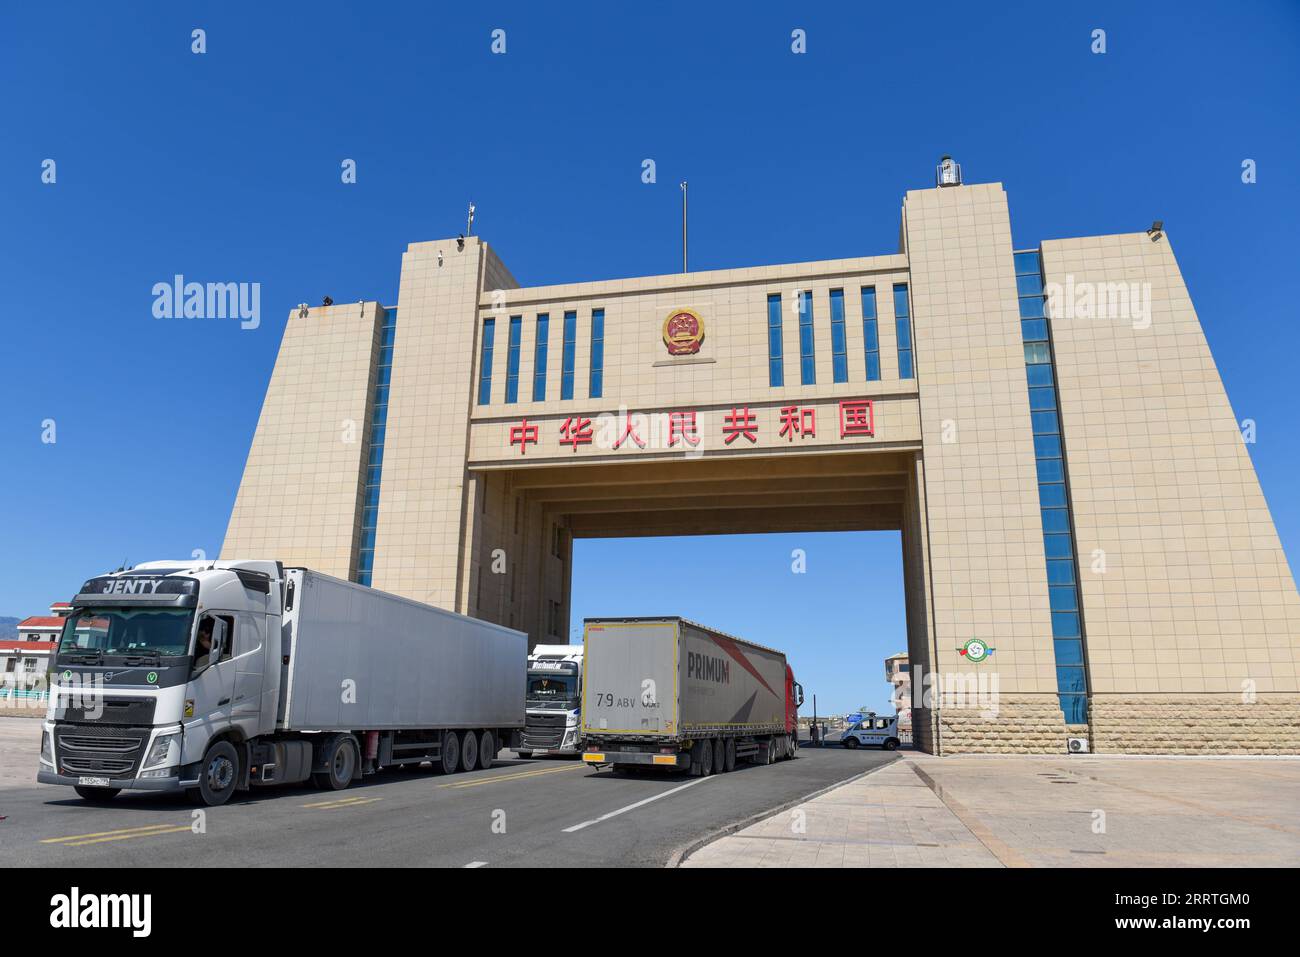 230725 -- ALATAW PASS, July 25, 2023 -- Cargo trucks are pictured at the Alataw Pass in northwest China s Xinjiang Uygur Autonomous Region, July 24, 2023. In recent years, various measures have been taken to create a better business environment for cross-border e-commerce enterprises in Alataw Pass. The cross-border e-commerce business was launched in the inland port in northwest China s Xinjiang Uygur Autonomous Region in January 2020. In the first half of this year, more than 14.50 million cross-border e-commerce packages worth about 1.677 billion yuan about 235 million U.S. dollars have bee Stock Photo